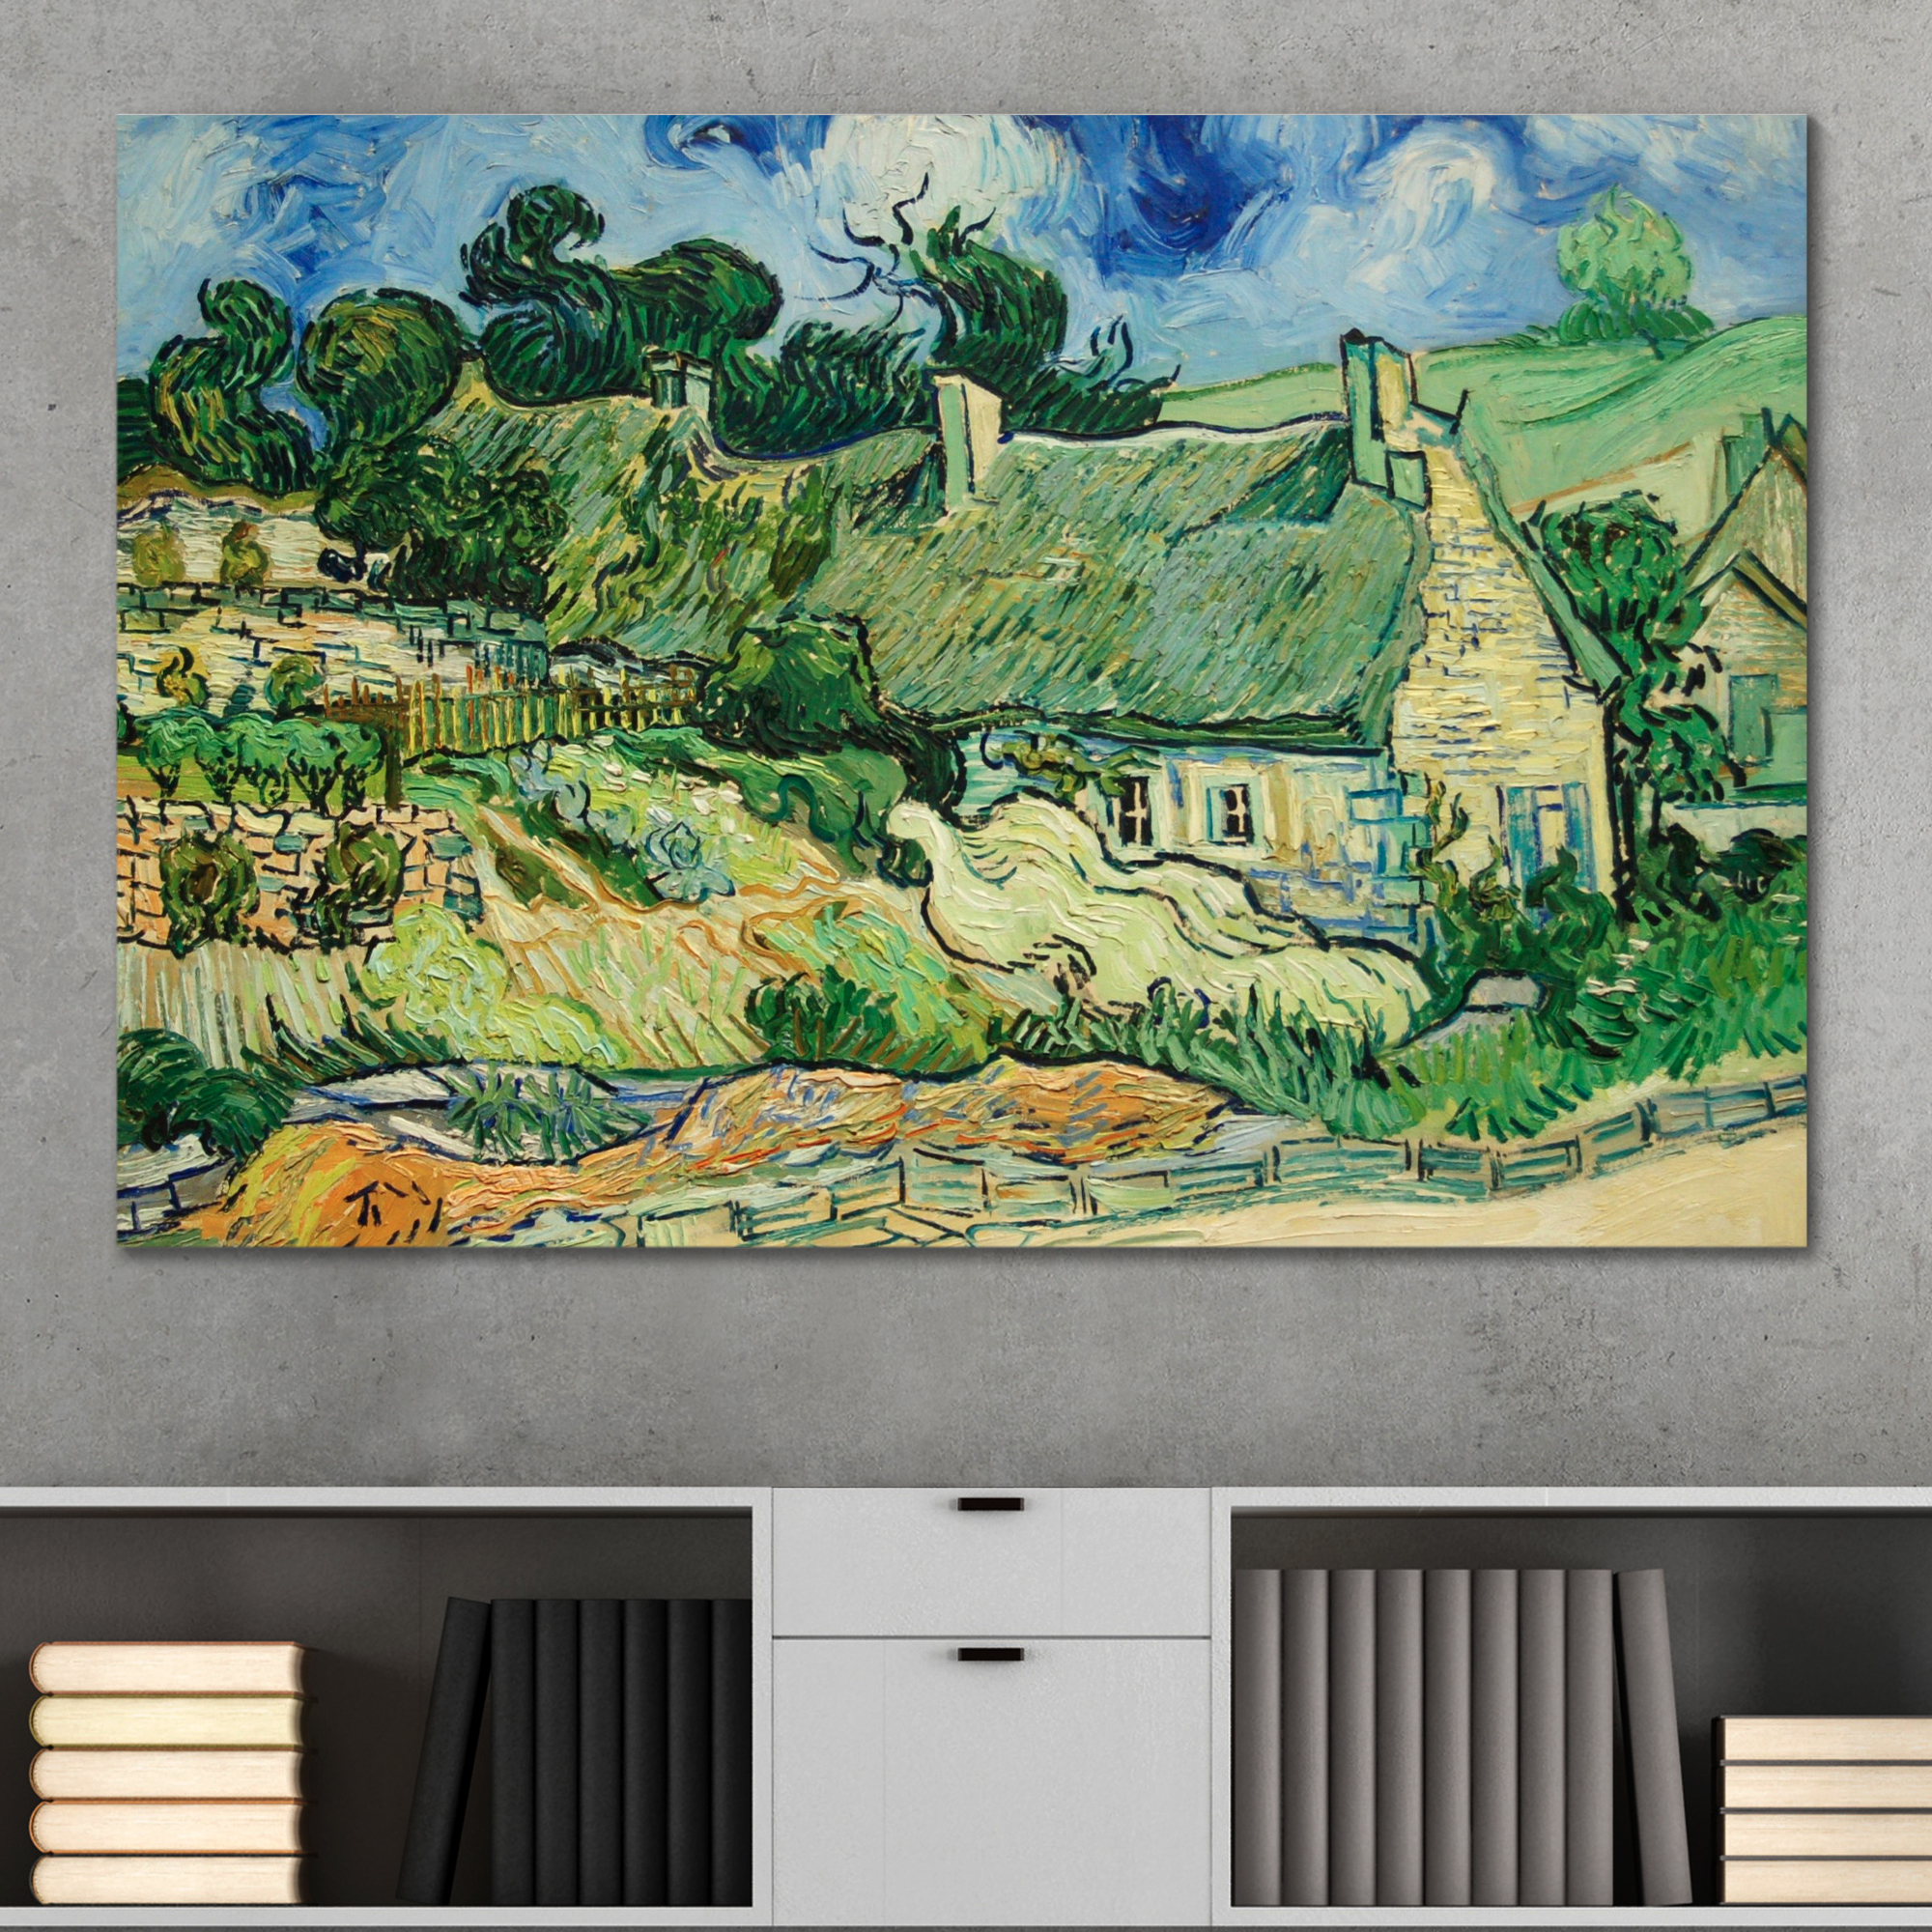 Thatched Cottages at Cordeville by Vincent Van Gogh - Canvas Print Wall Art Famous Painting Reproduction - 32